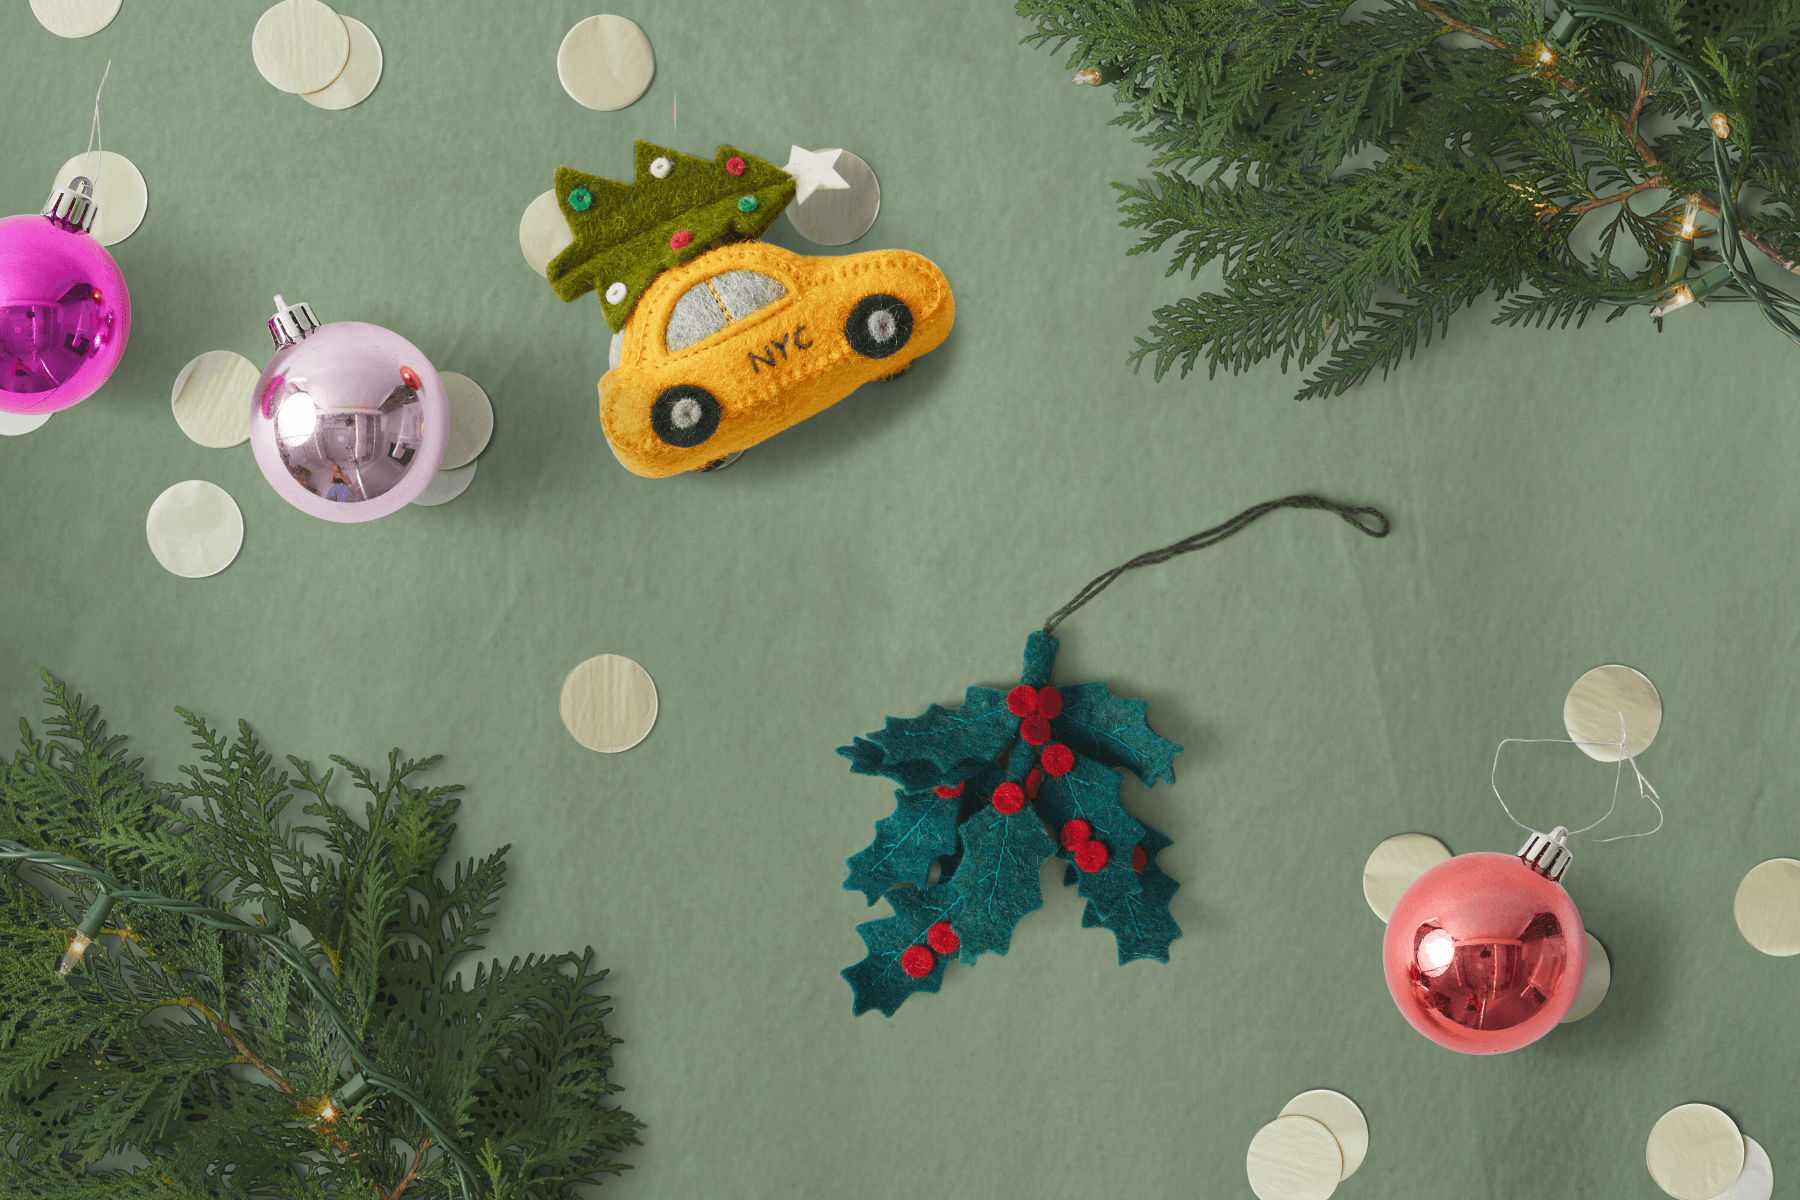 Holiday ornaments available at Party Shop: Yellow taxi and holly sprig by Craftspring. The items are surrounded by greenery, confetti, and bulb-shaped ornaments.